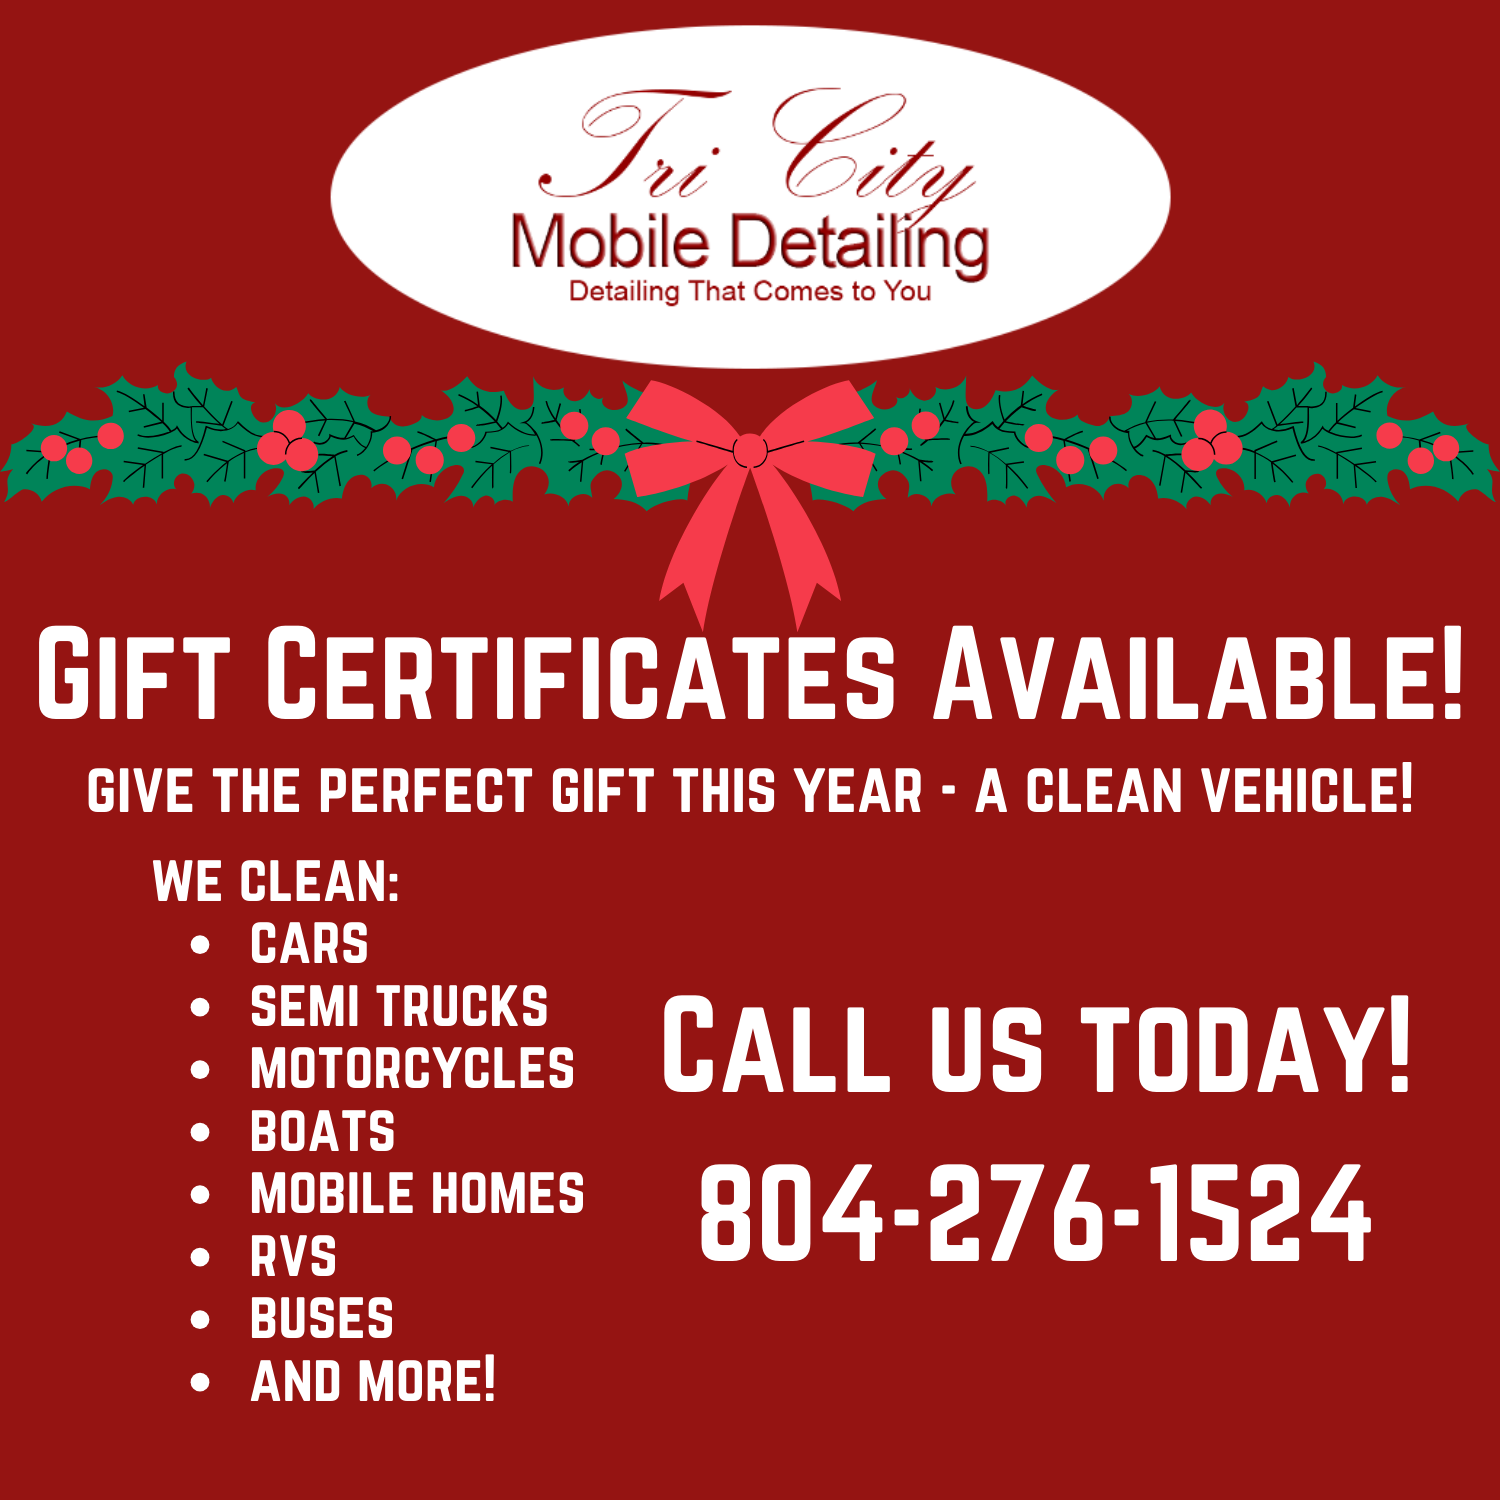 Gift Certificate Advertisment - Call 804-276-1524